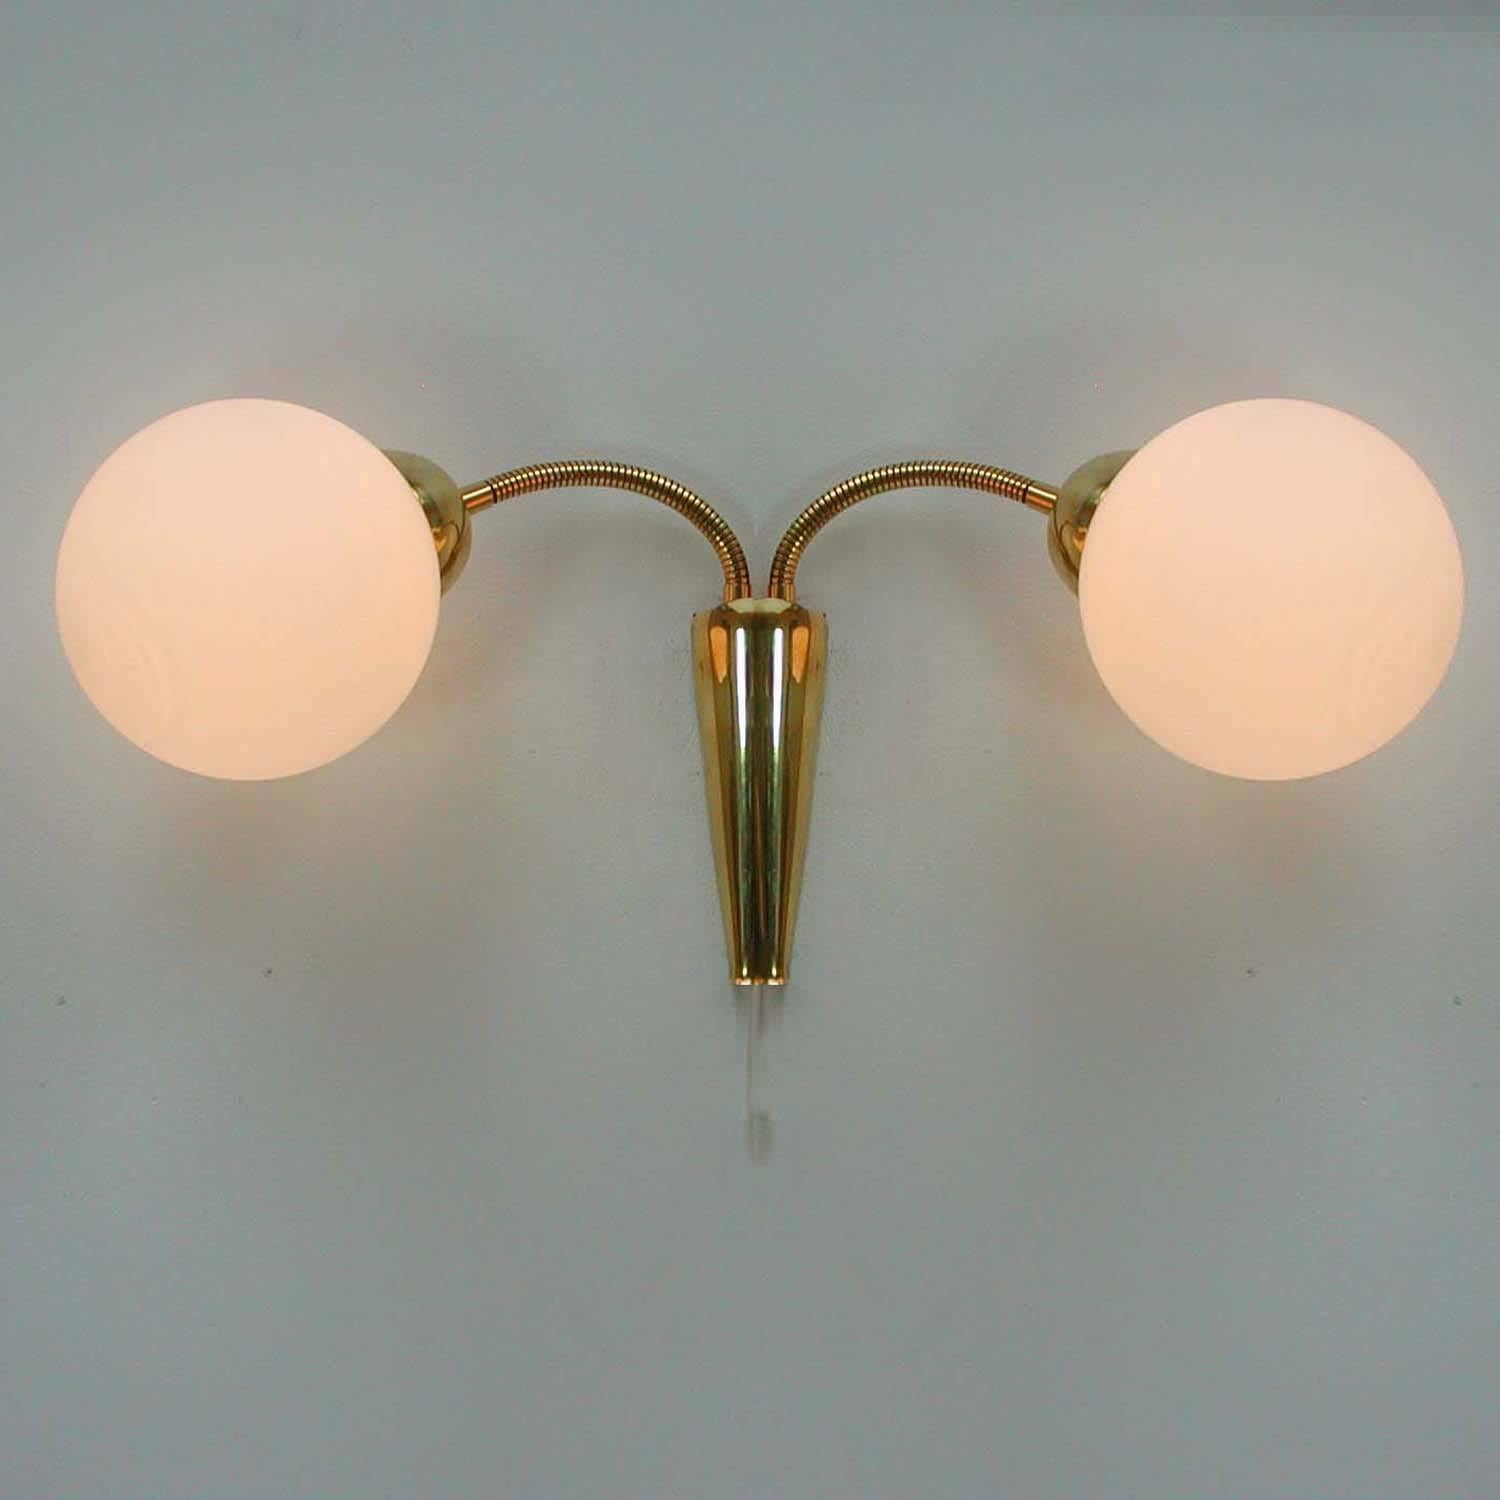 Midcentury Italian Double-Gooseneck Brass and Opal Glass Sconce, 1950s For Sale 2